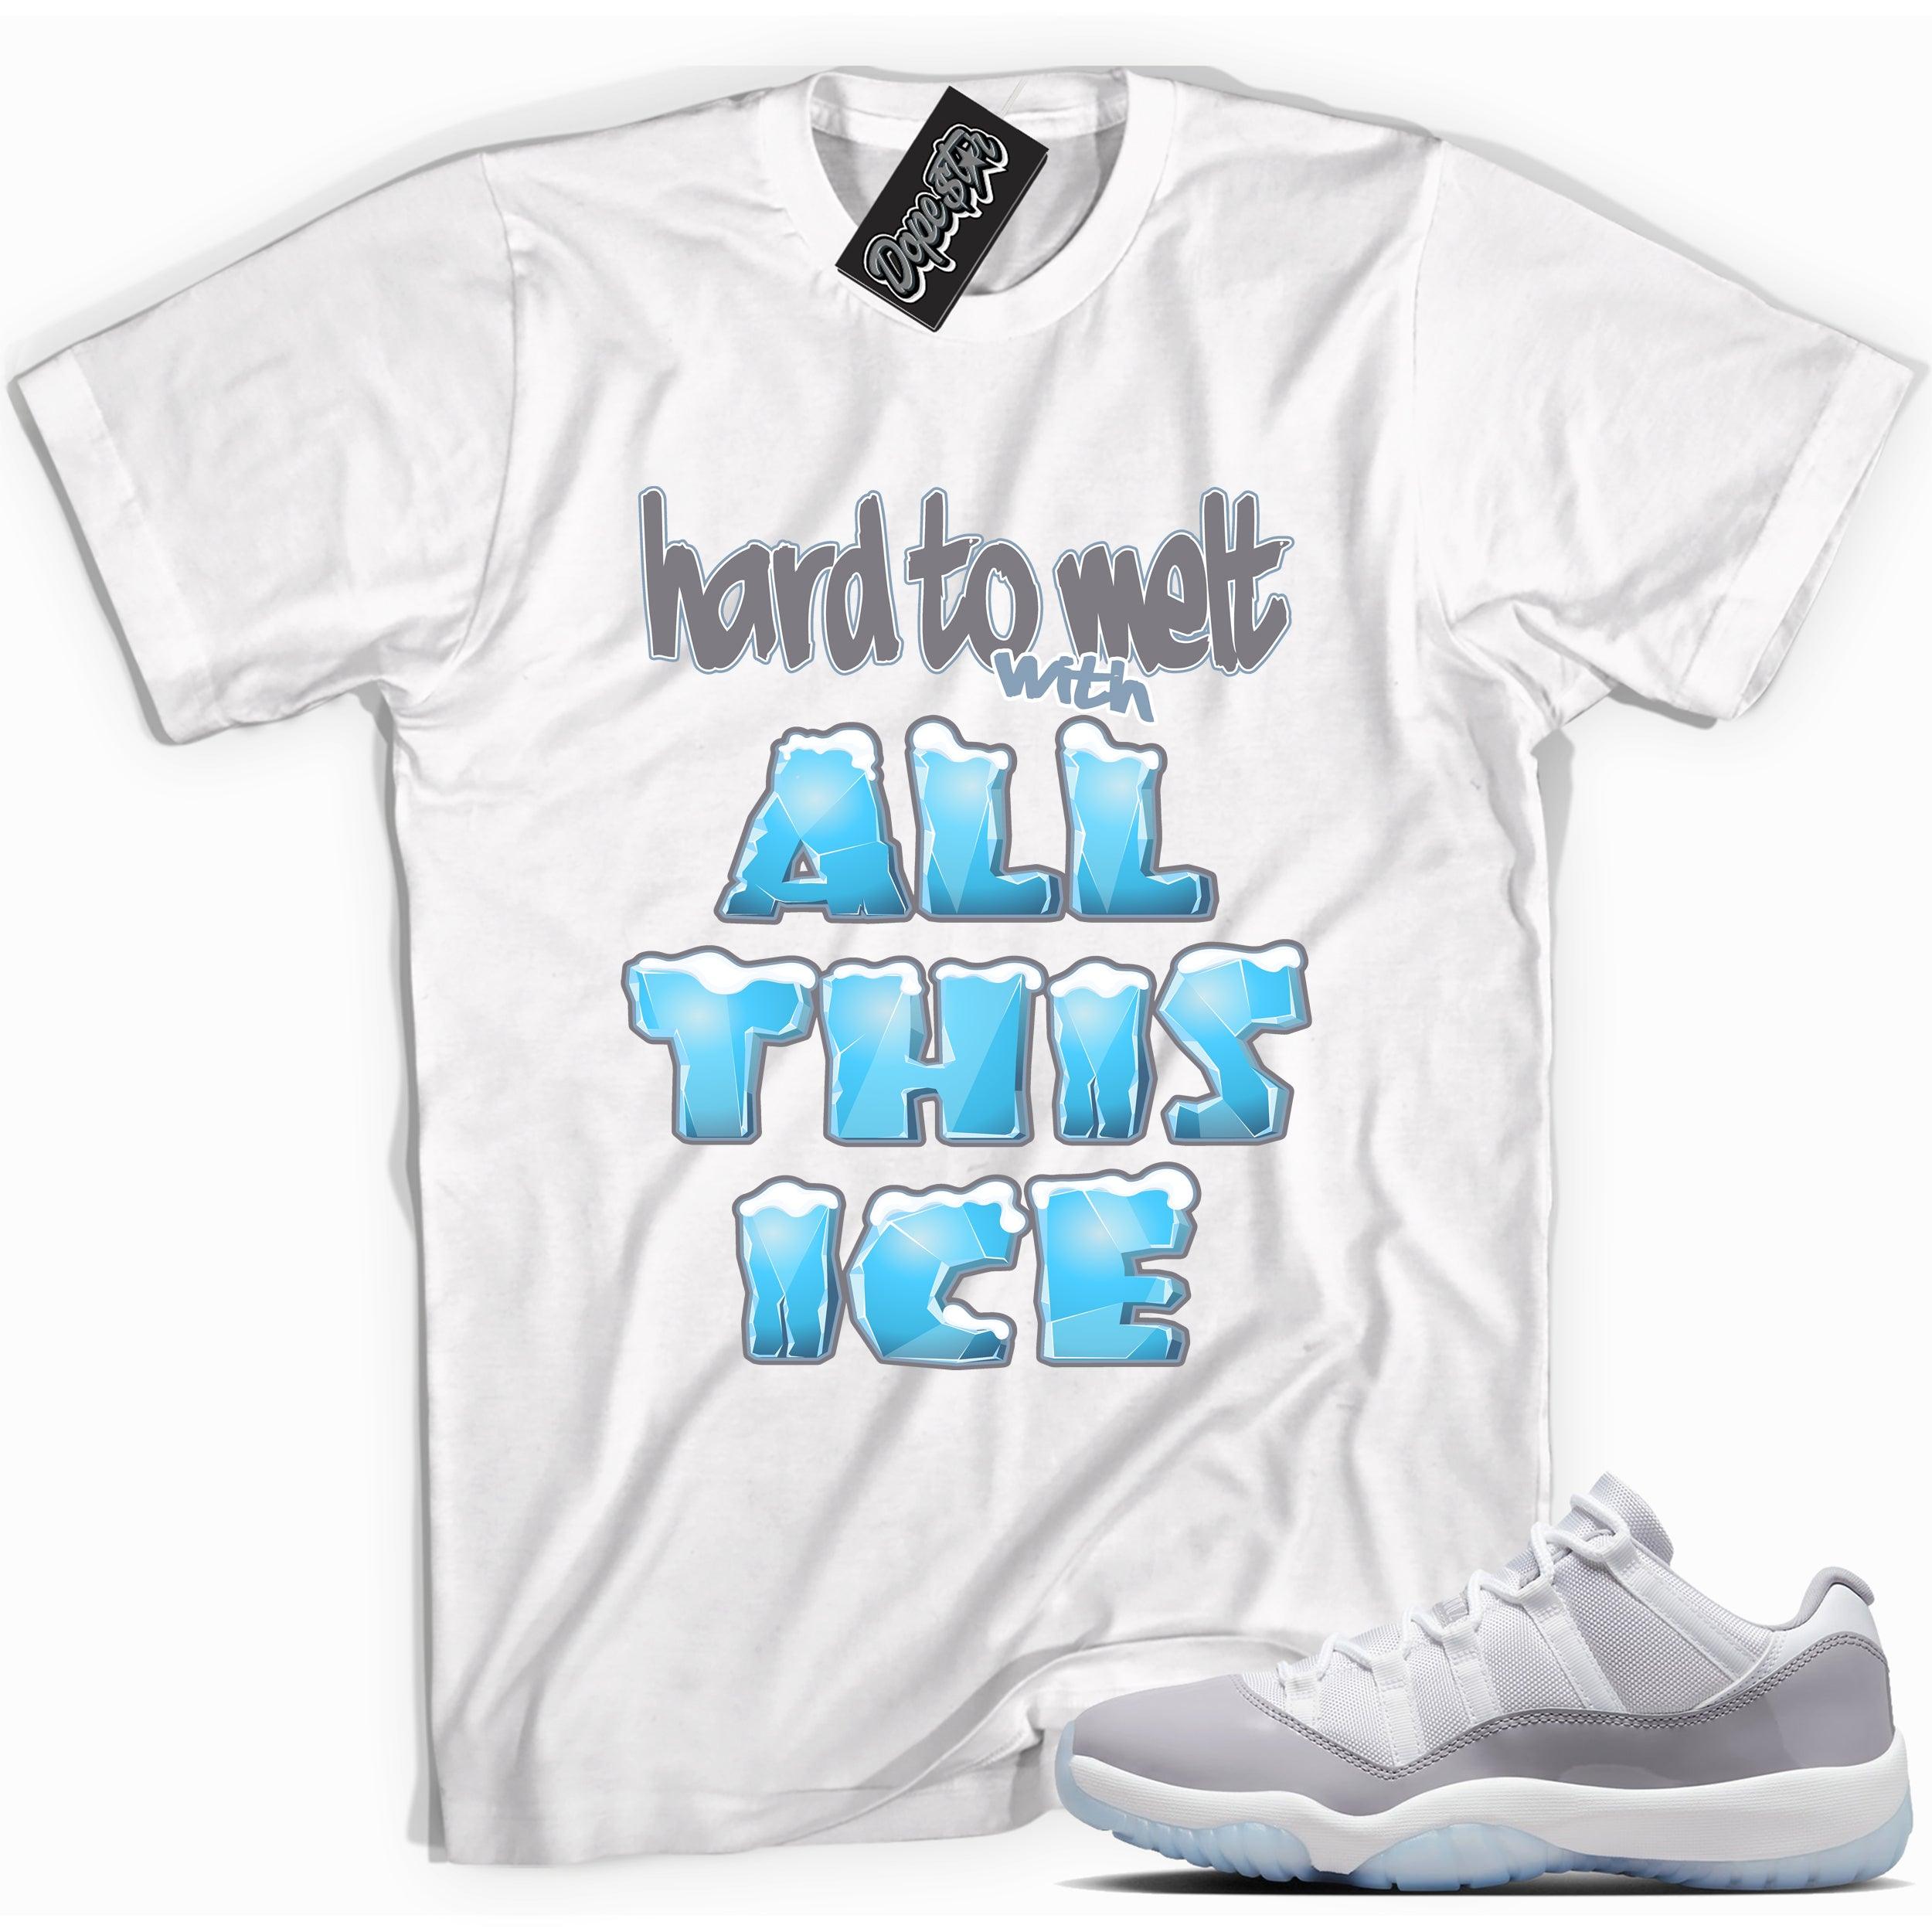 Cool White graphic tee with “ All This Ice ” print, that perfectly matches Air Jordan 11 Retro Low Cement Grey sneakers 